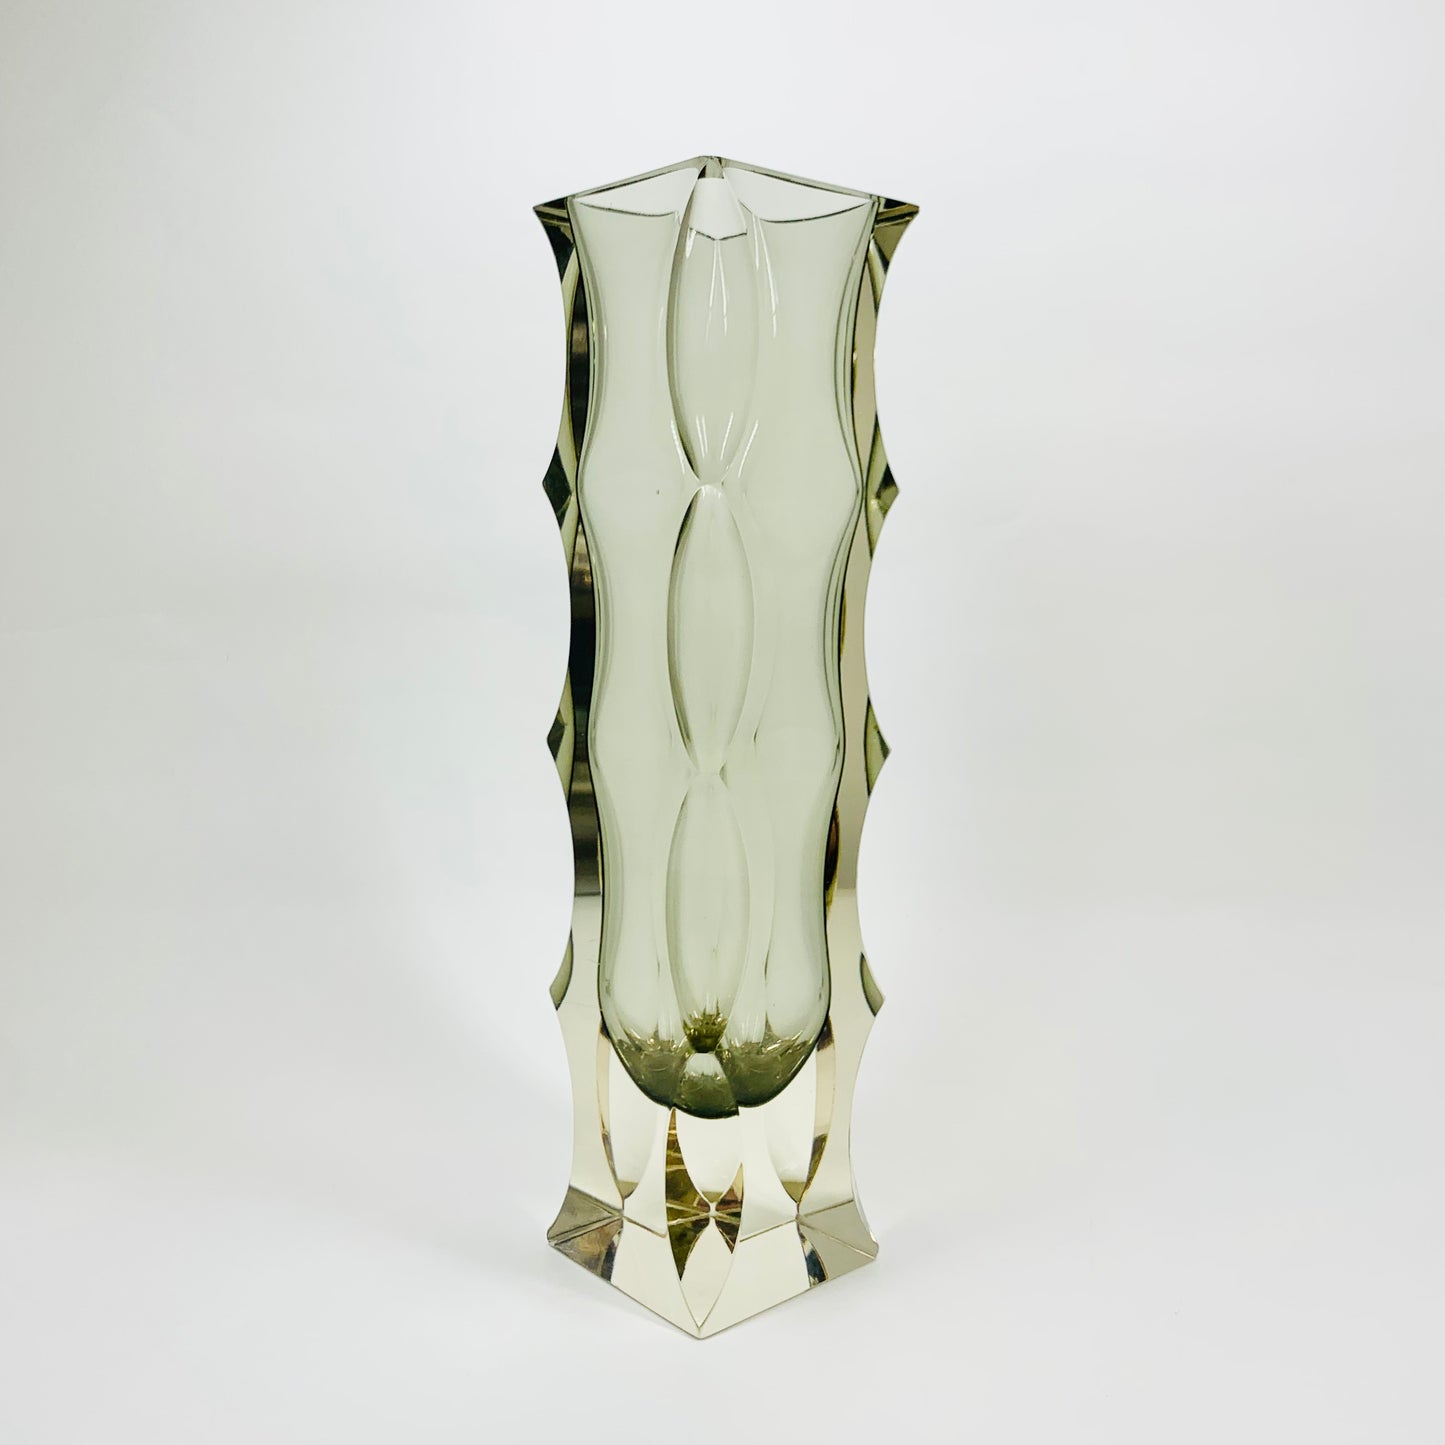 Extremely rare large MCM grey Murano faceted sommerso glass vase by Mandruzzato